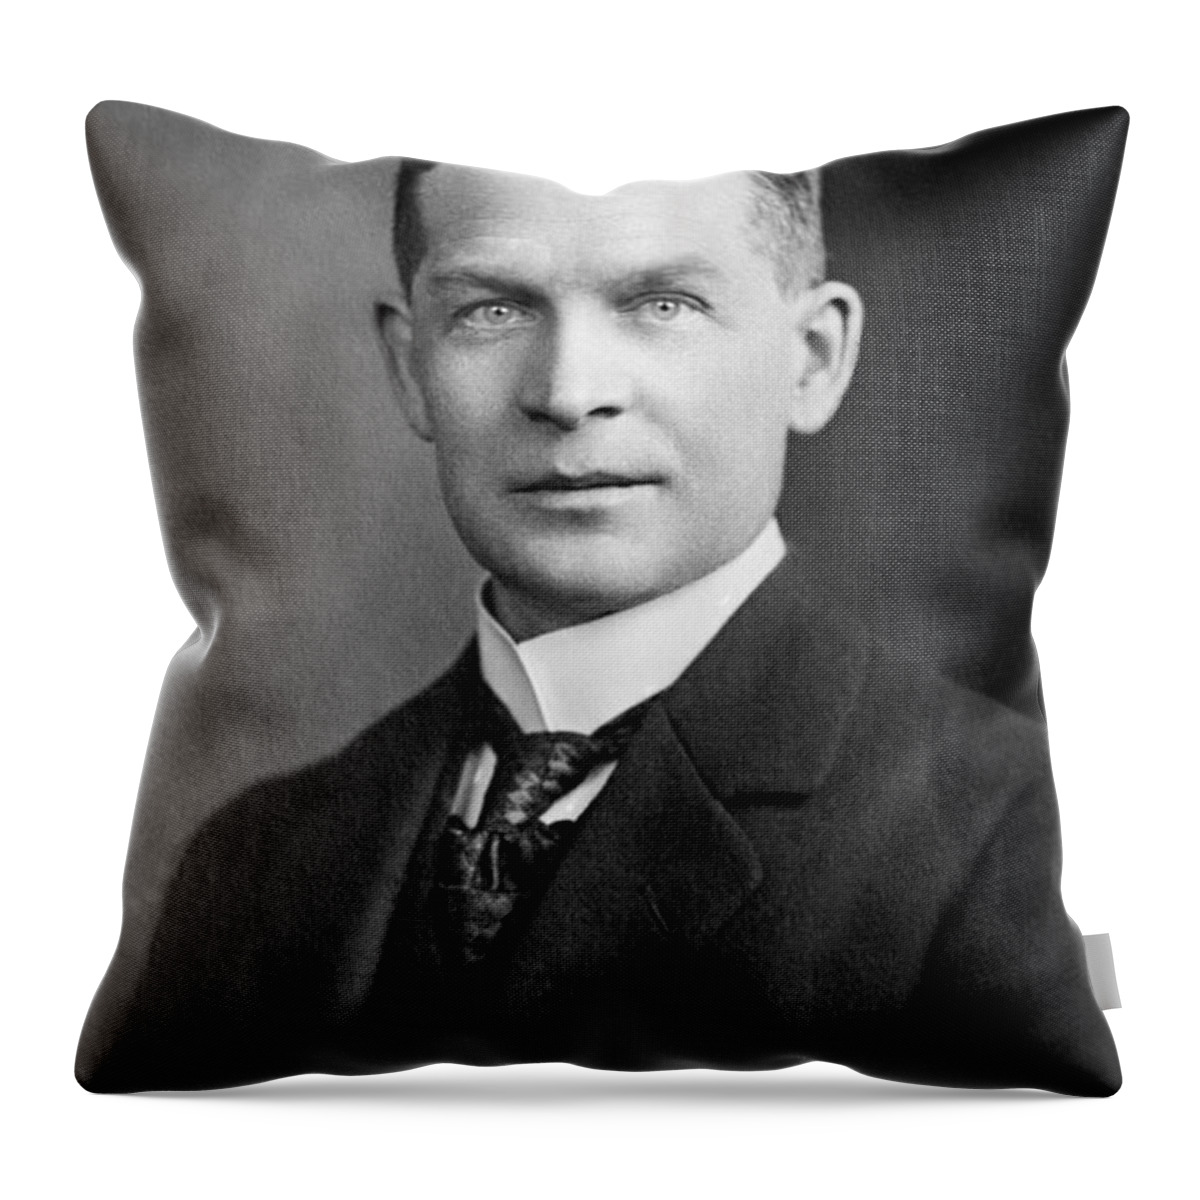 Science Throw Pillow featuring the photograph Frederick Soddy, English Radiochemist #1 by Science Source